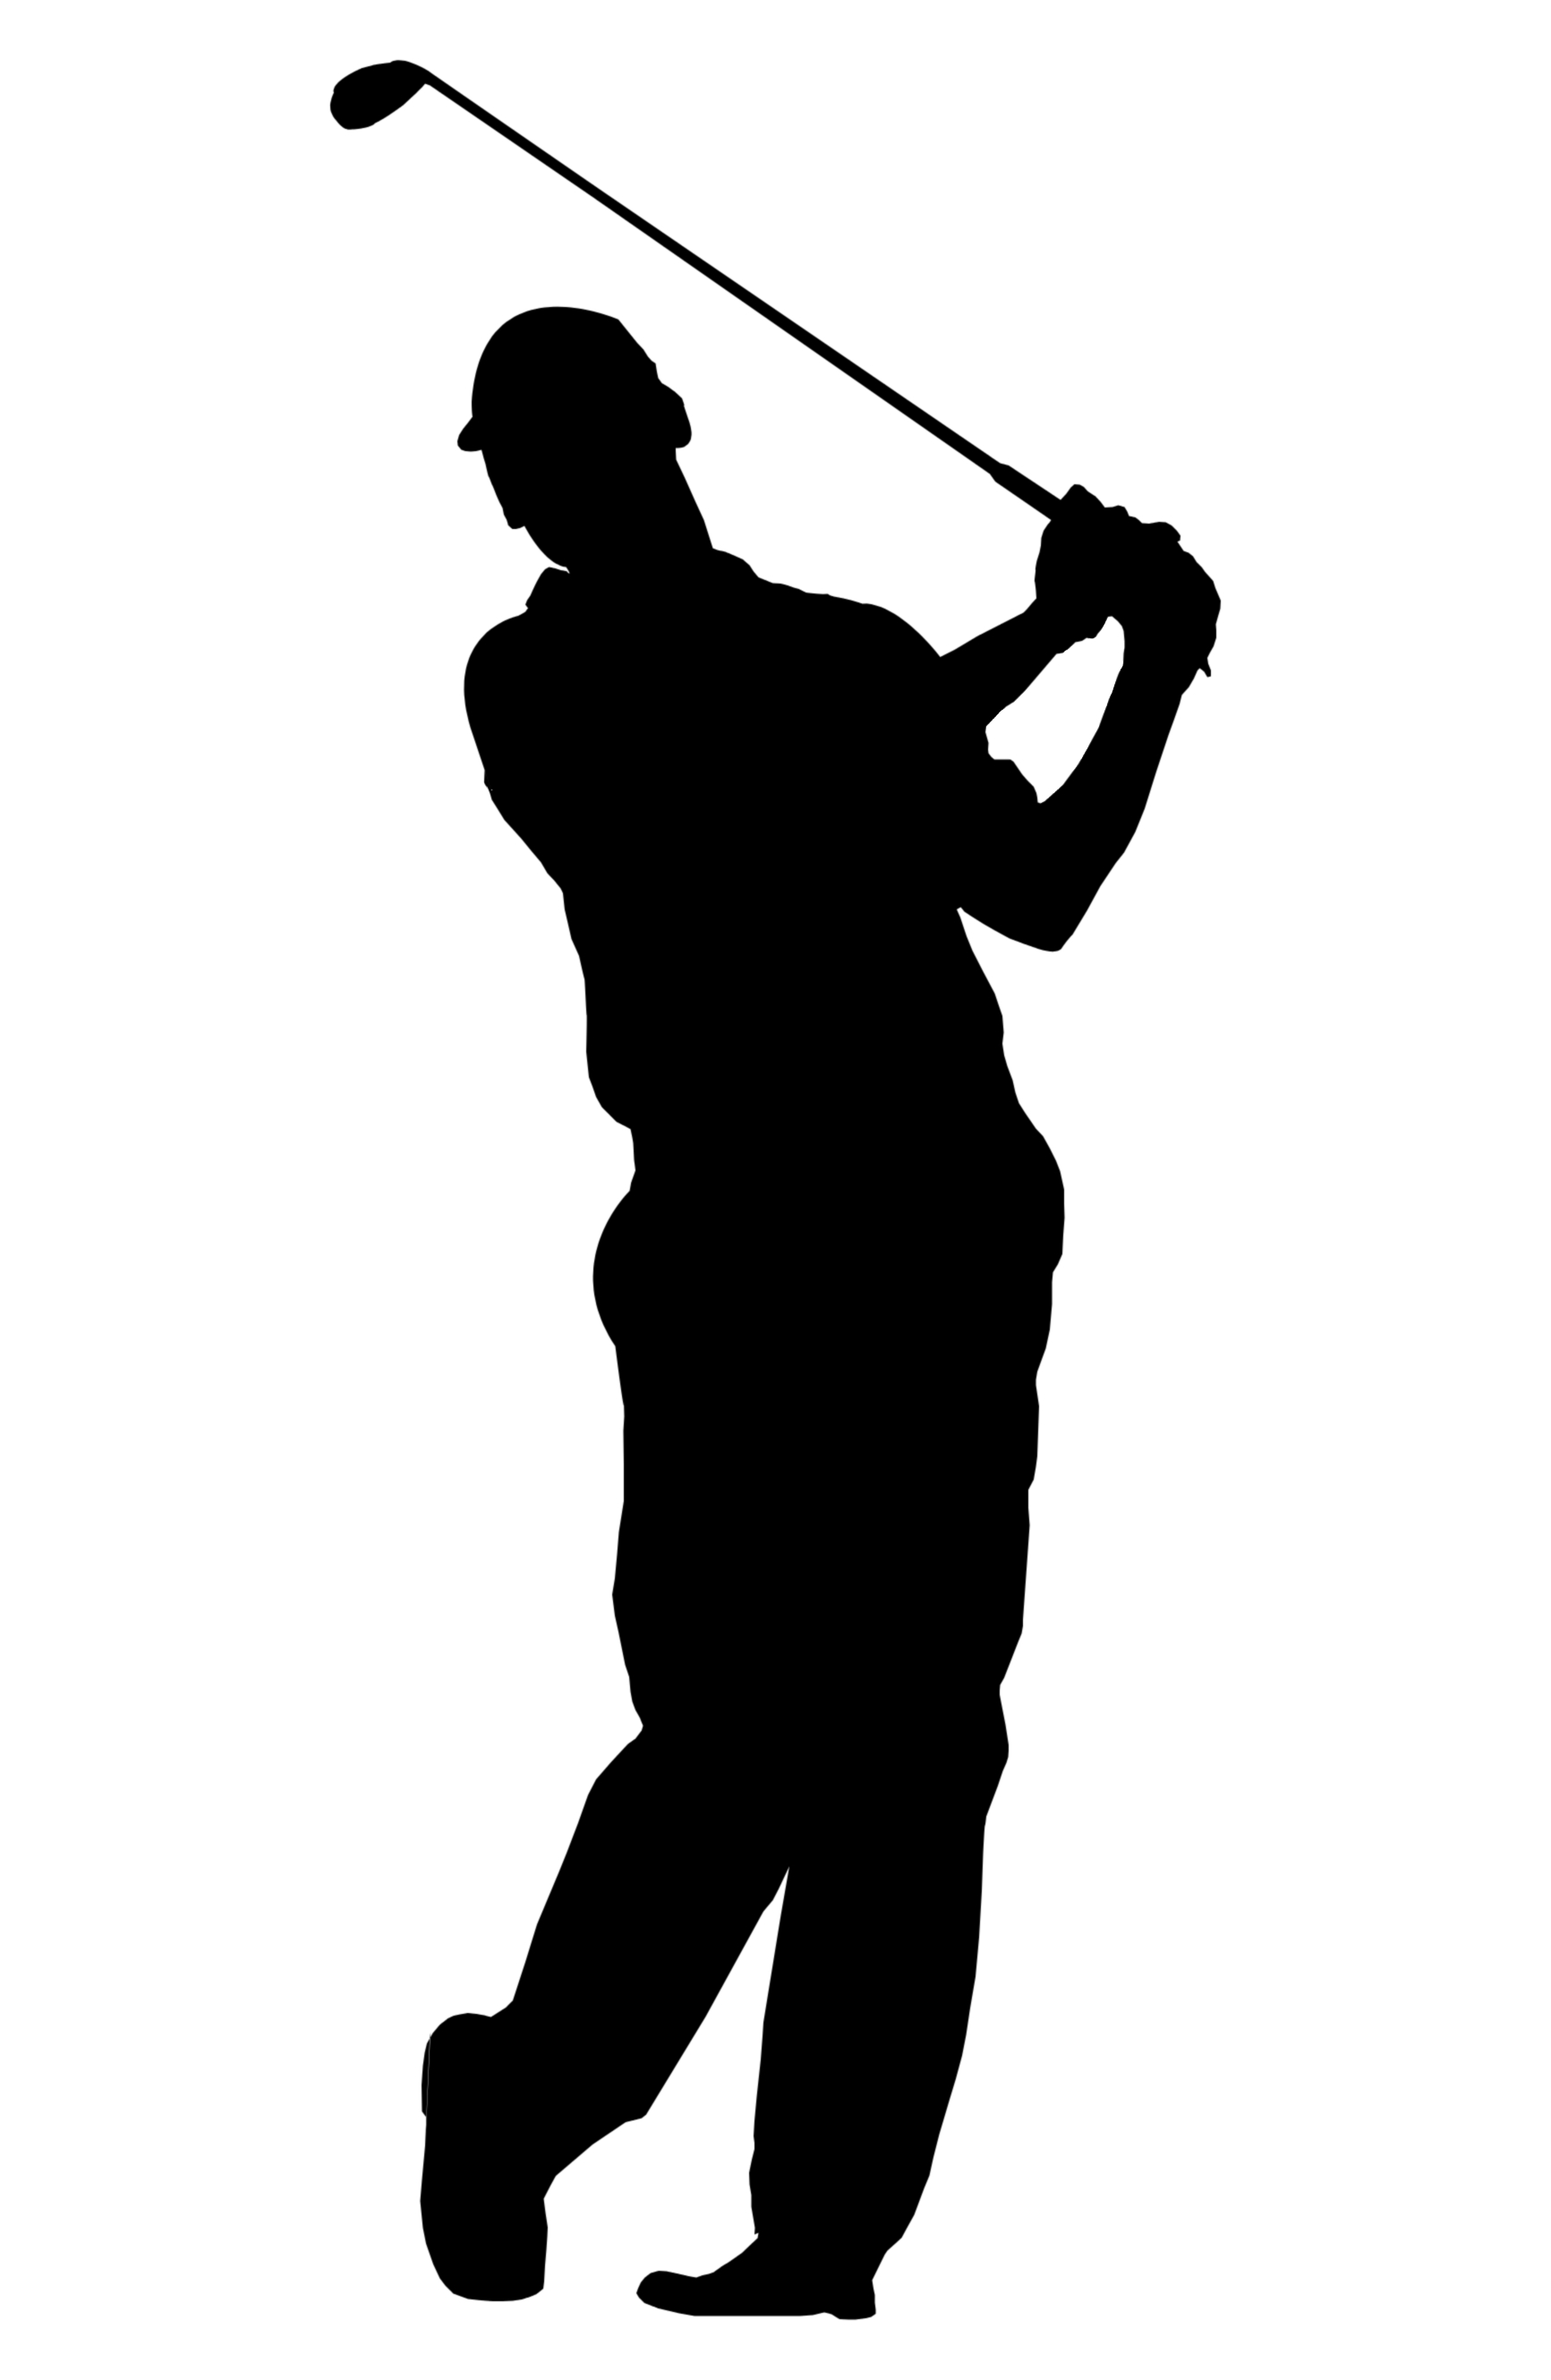 Free Golf Silhouette Vector, Download Free Clip Art, Free